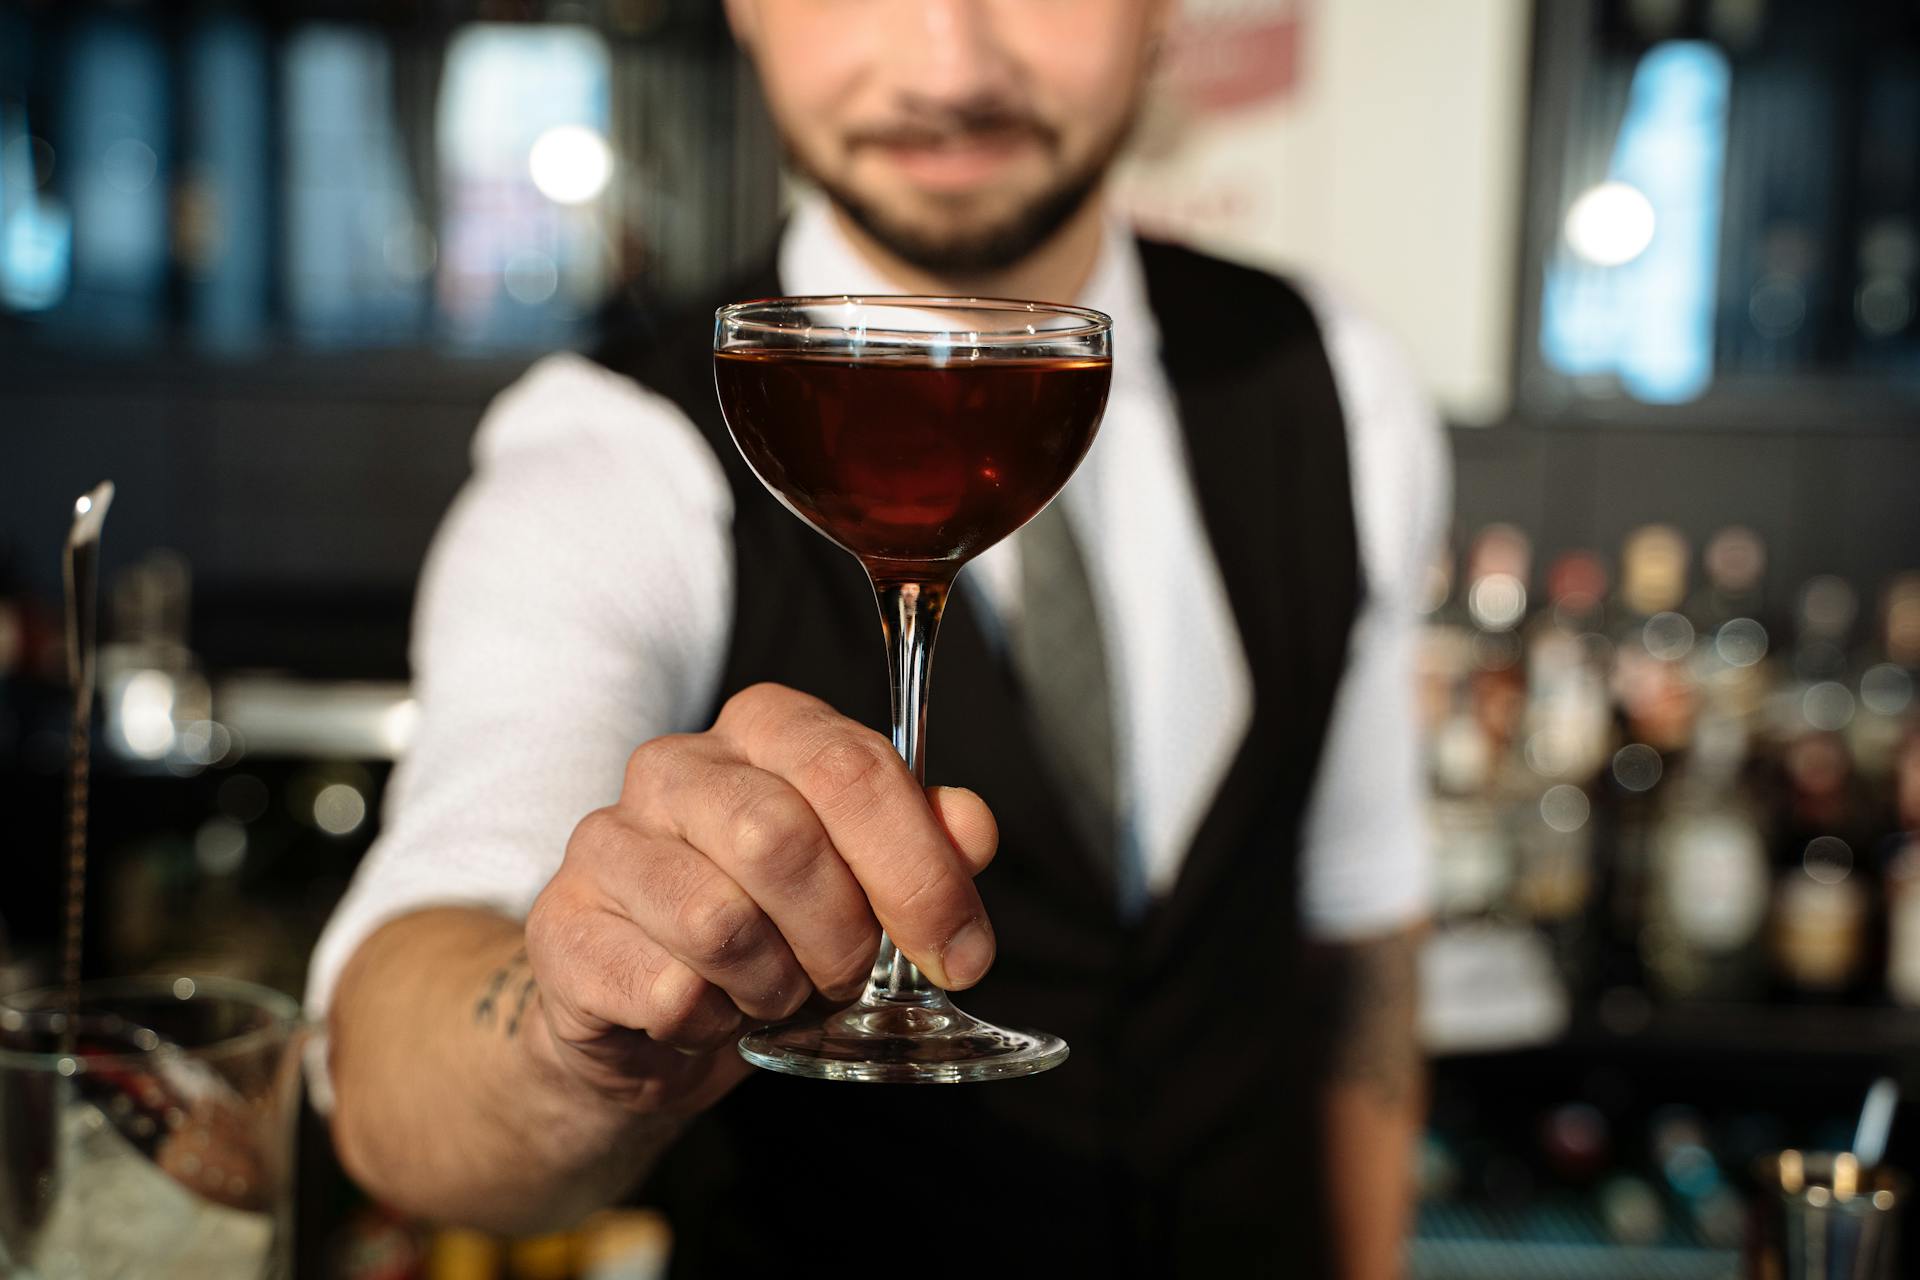 A bartender holding a cocktail | Source: Pexels